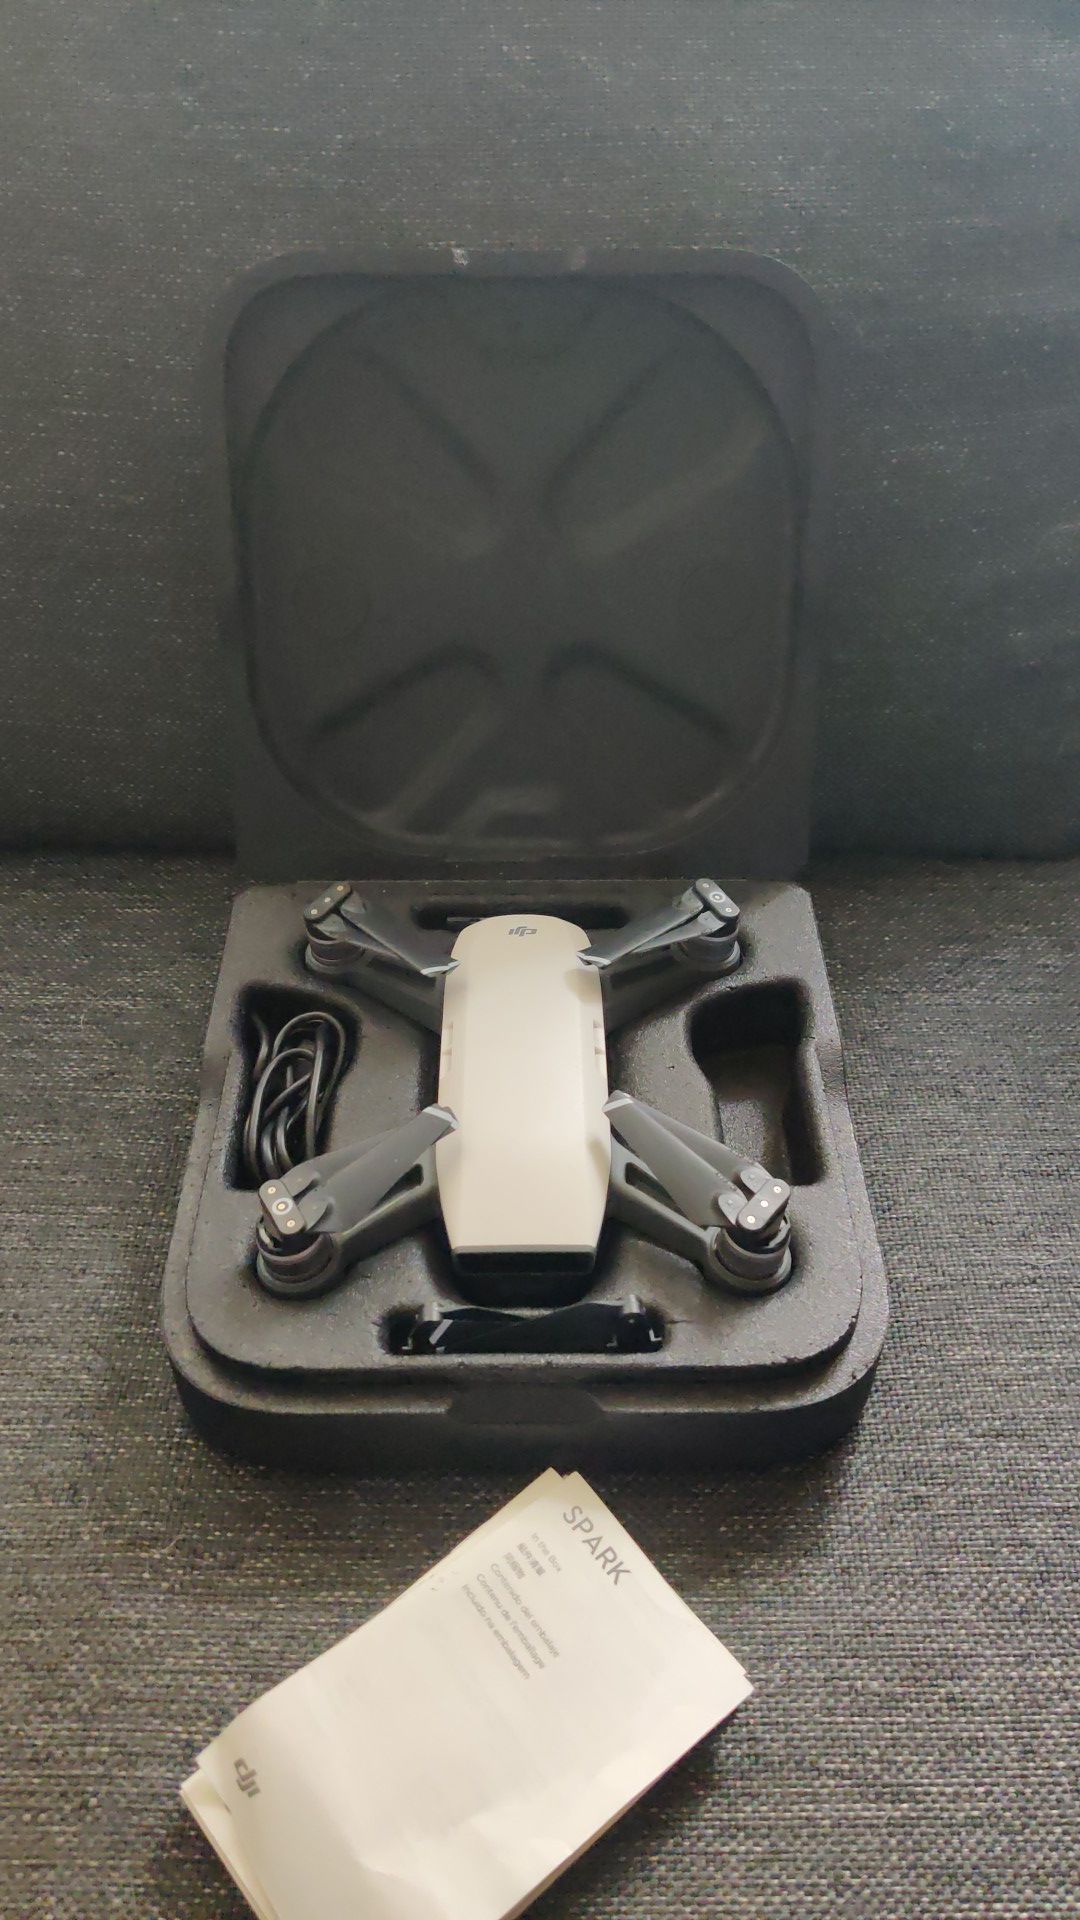 DJI Spark - In Perfect Condition